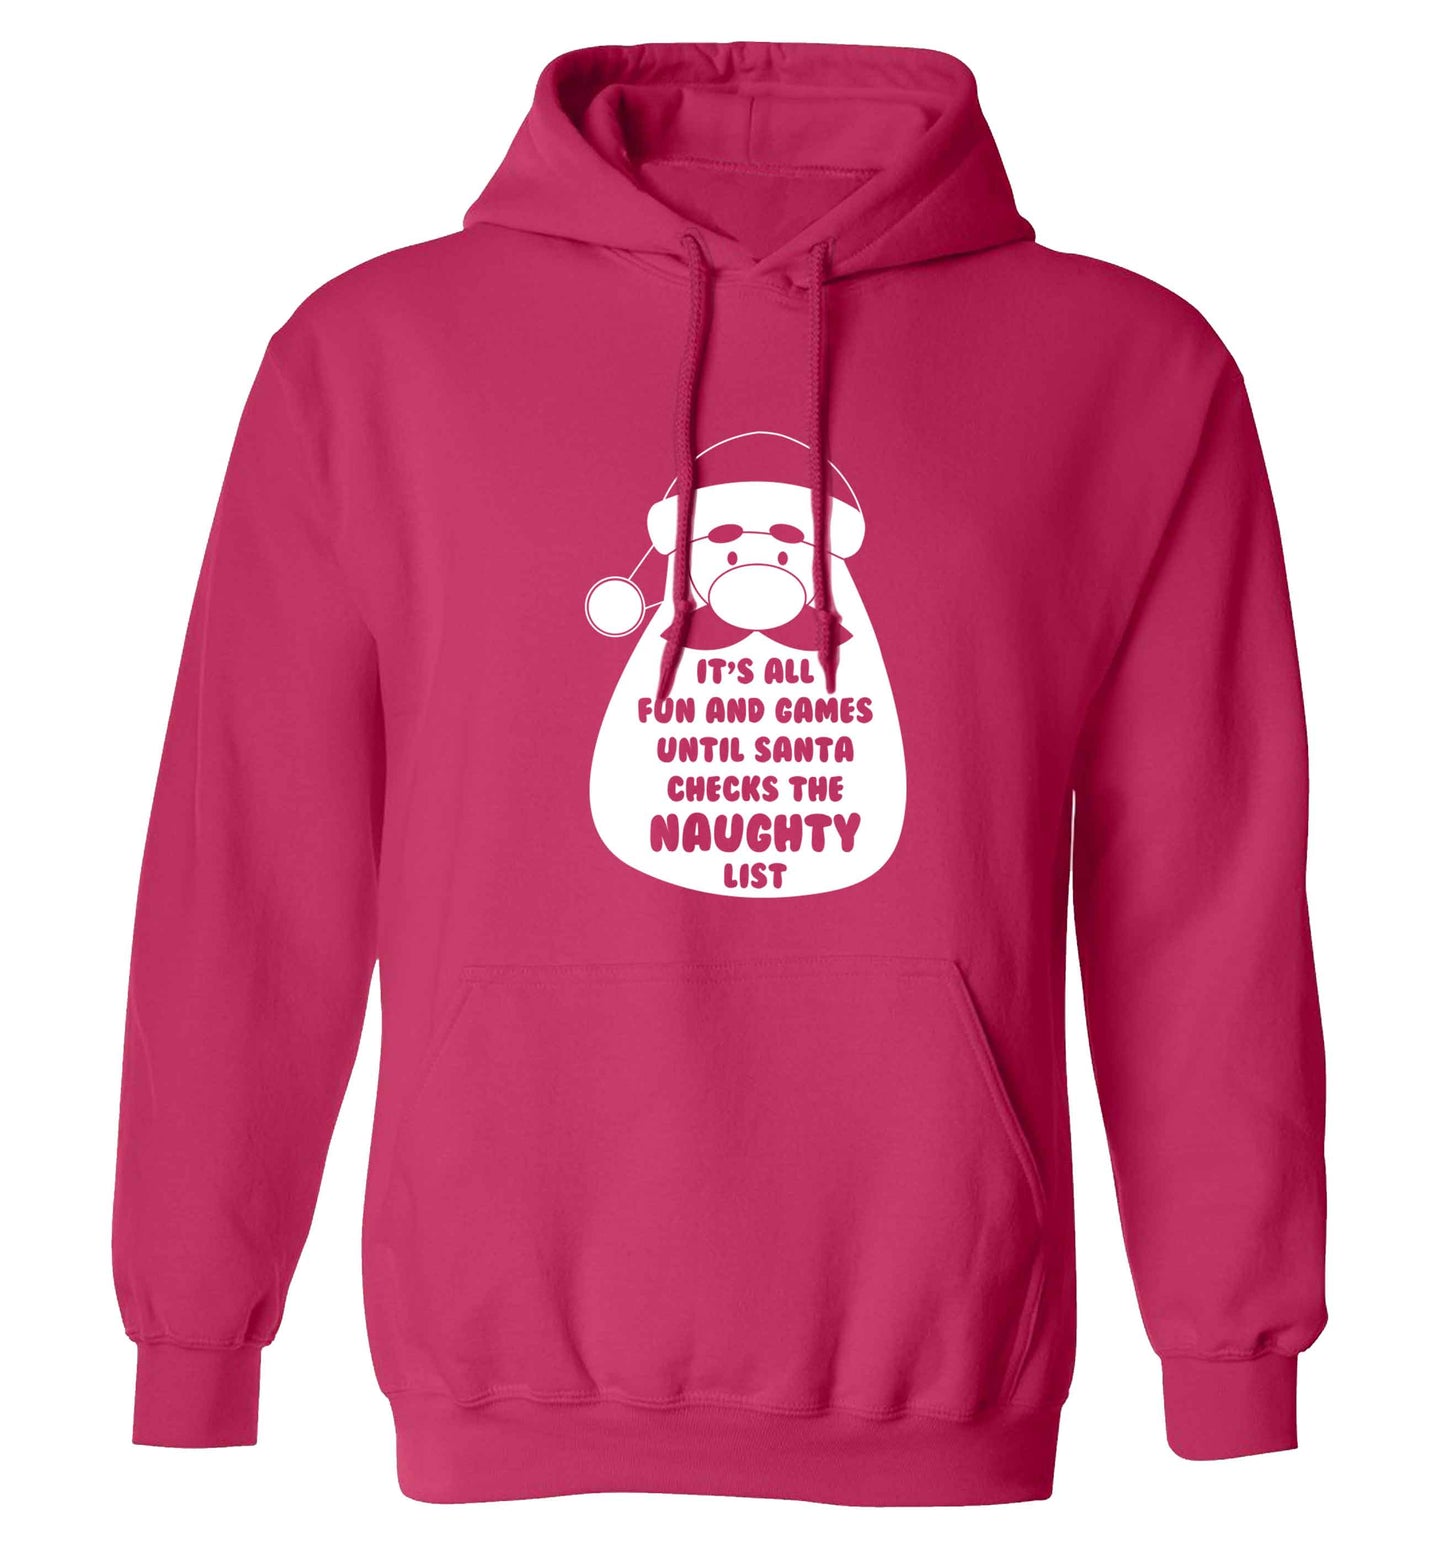 It's all fun and games until Santa checks the naughty list adults unisex pink hoodie 2XL